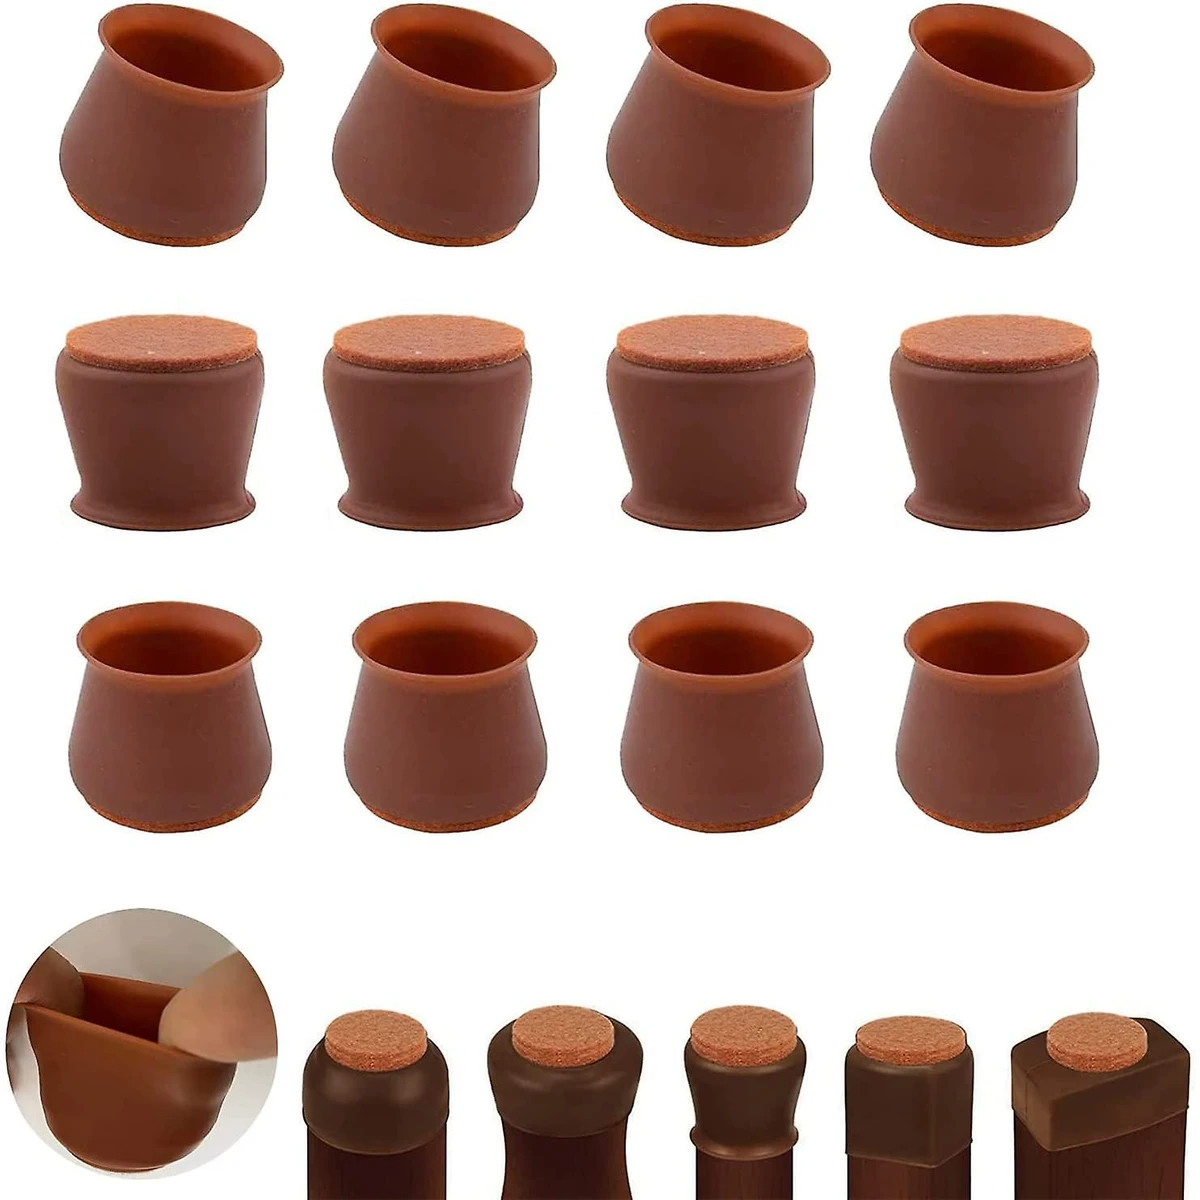 24 pcs Chair Leg Floor Protectors Felt Bottom Furniture Silicone Leg Caps, Chair Leg Covers to Reduce Noise, Easily Moving for Furniture Chair Feet,(coffee colour)